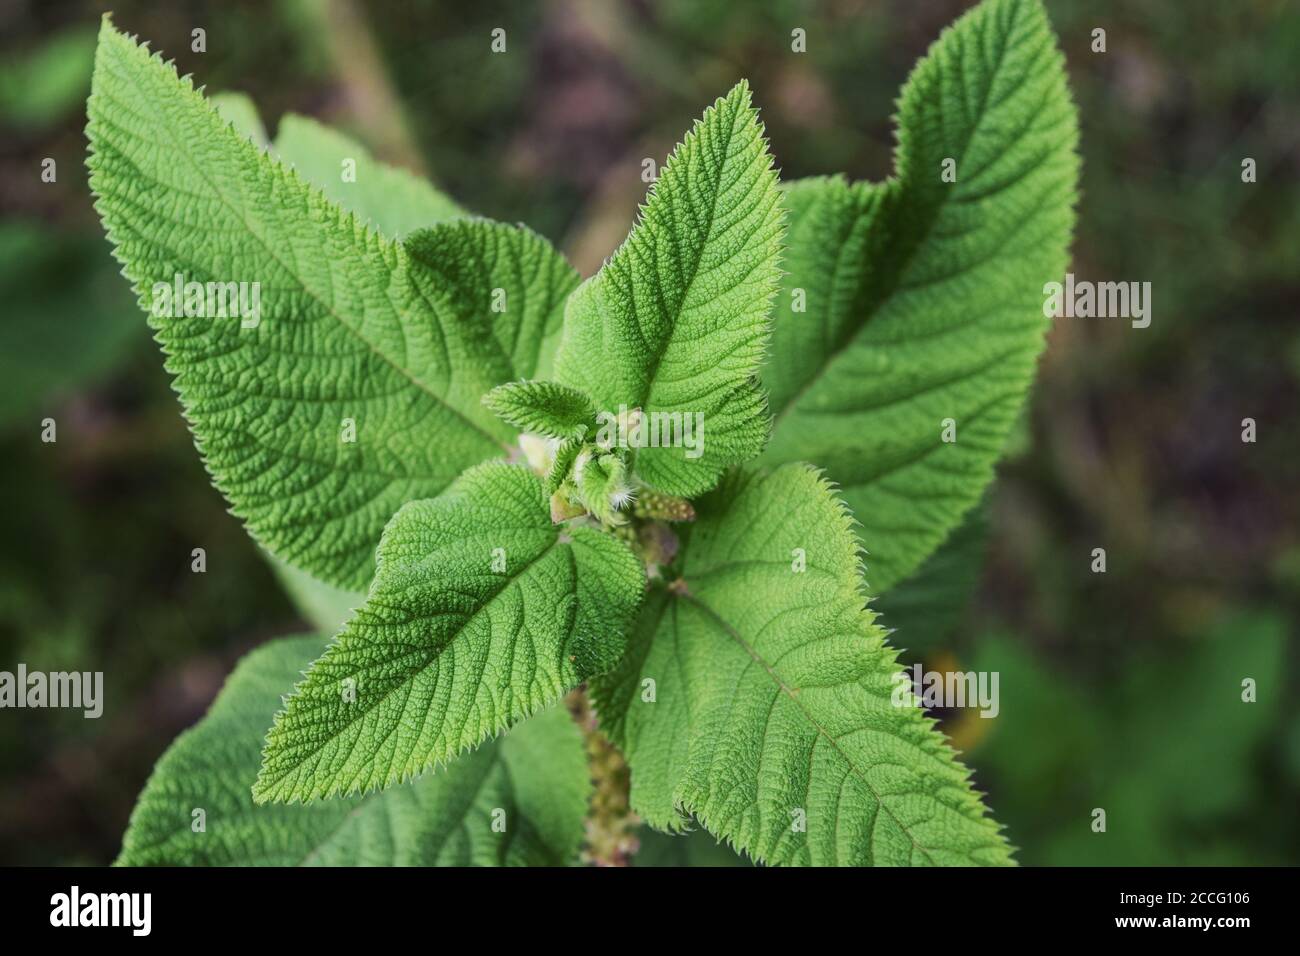 A close up of a stinging nettle -  Urtica dioica growing in the wild at Aberdare Ranges, Kenya Stock Photo